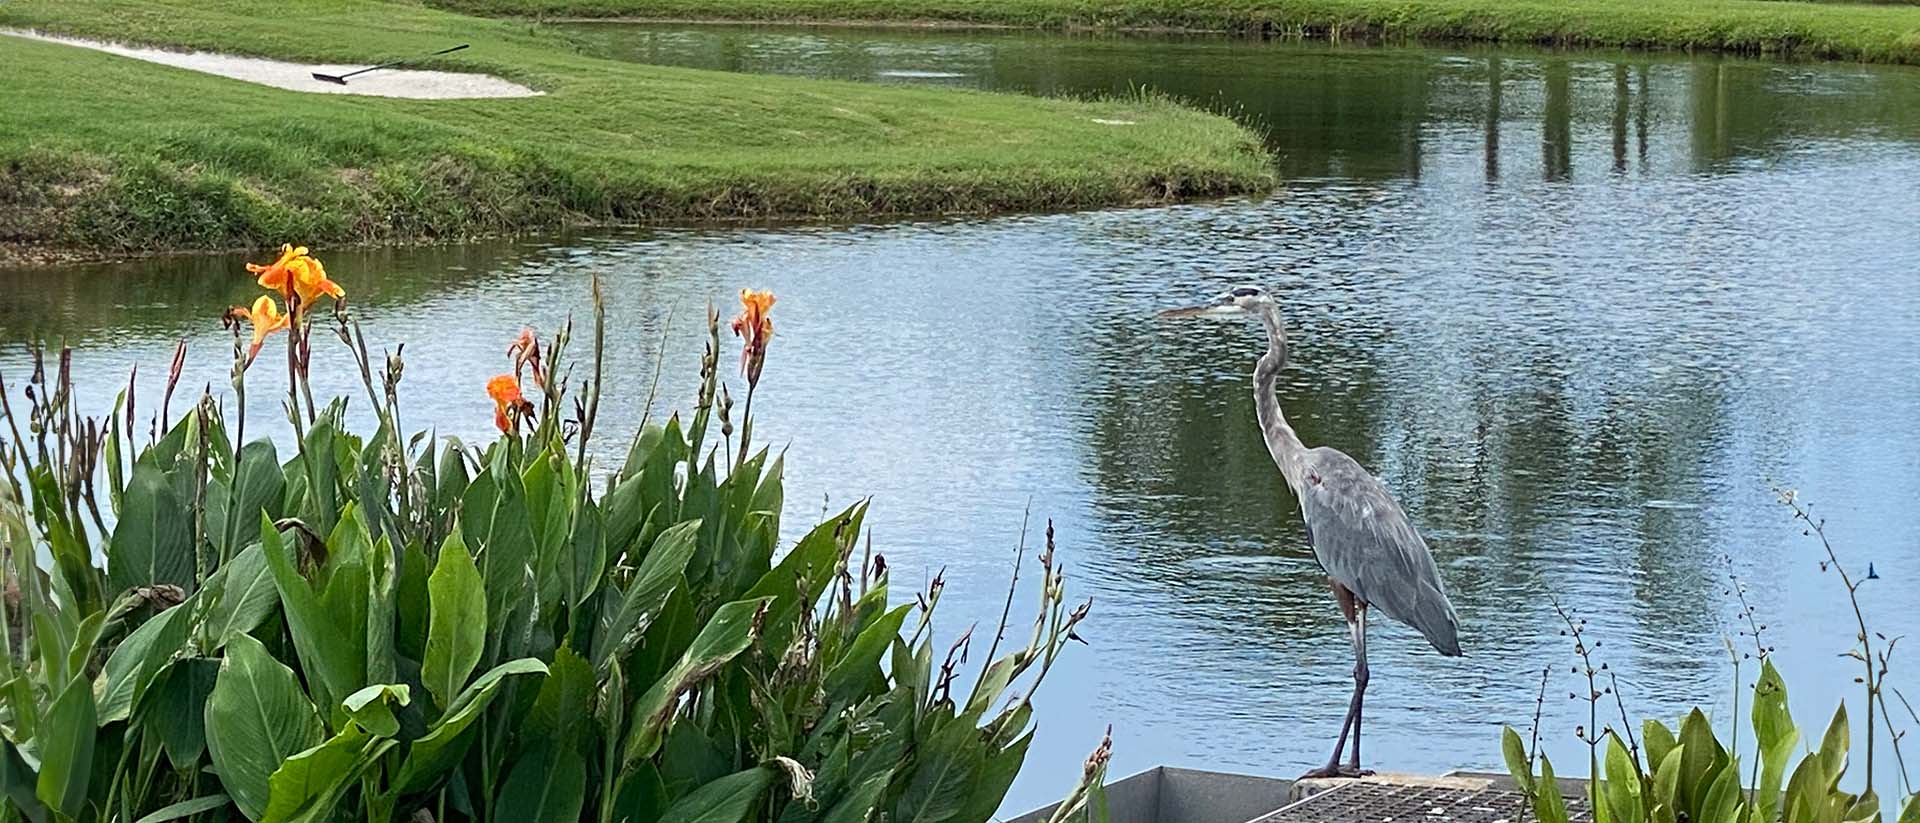 Great Blue Heron sitting near a flowering water plant at the edge of a pond